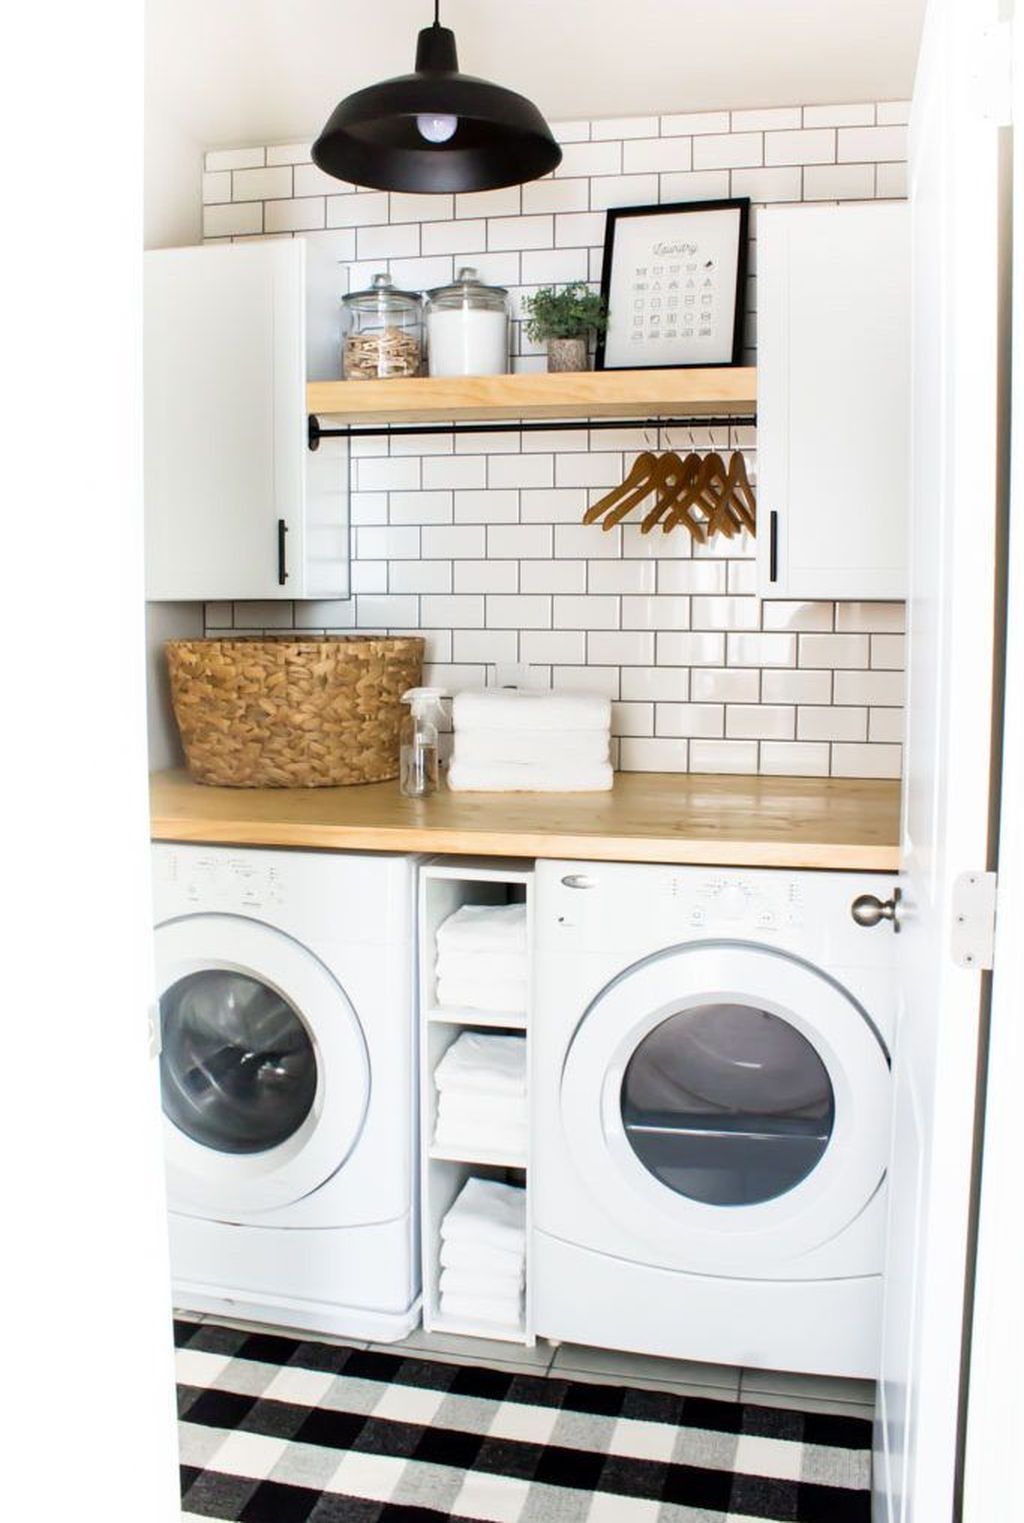 30+ Fascinating Small Laundry Room Design Ideas